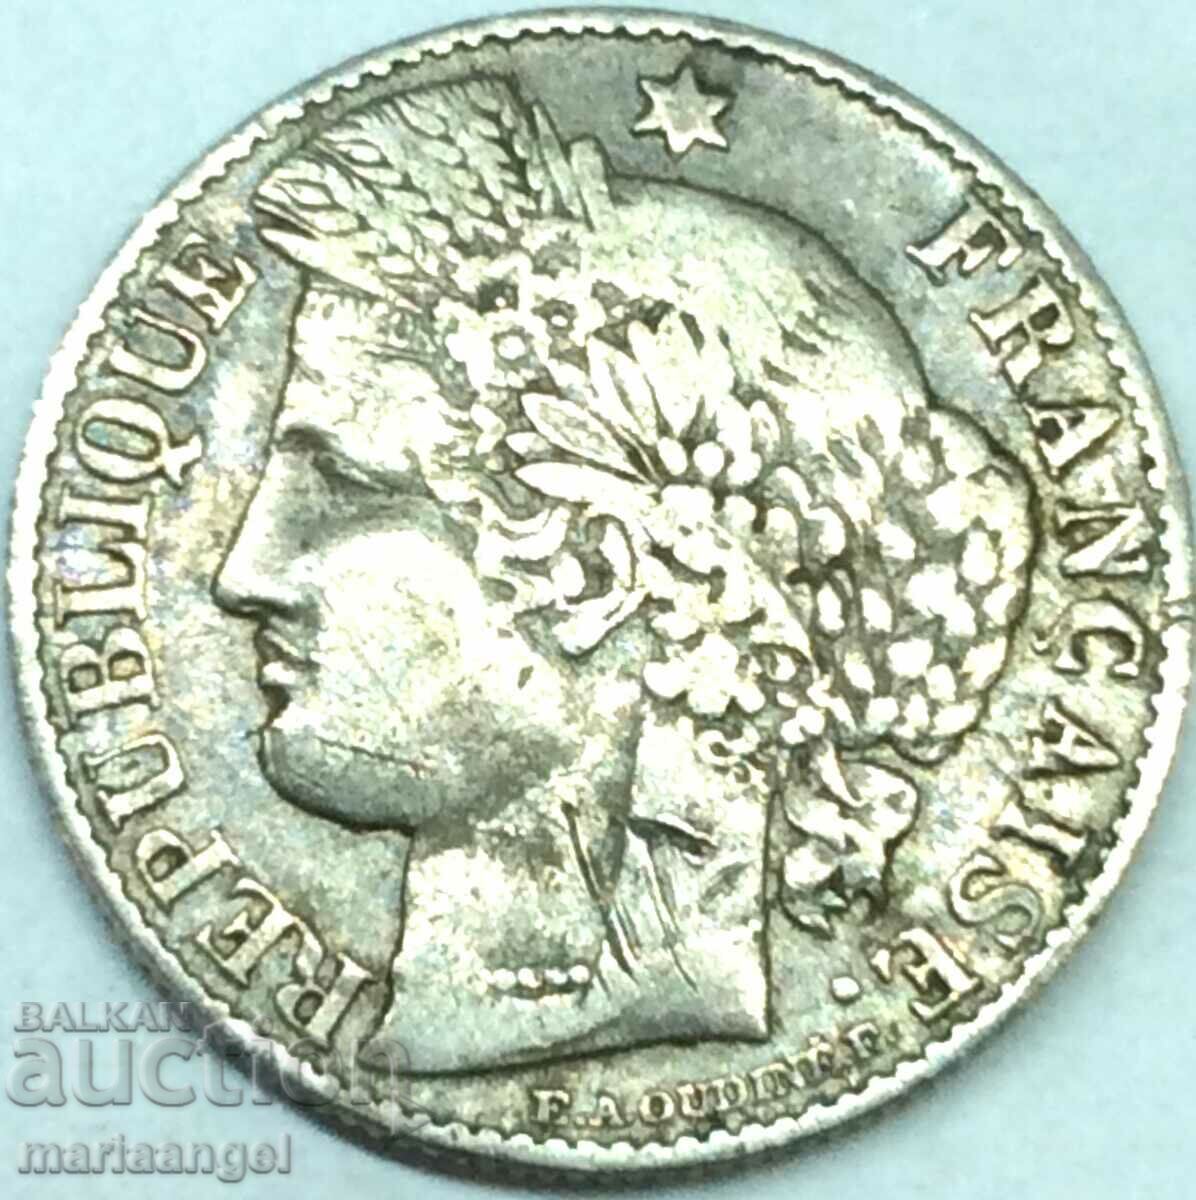 France 50 centimes 1894 silver